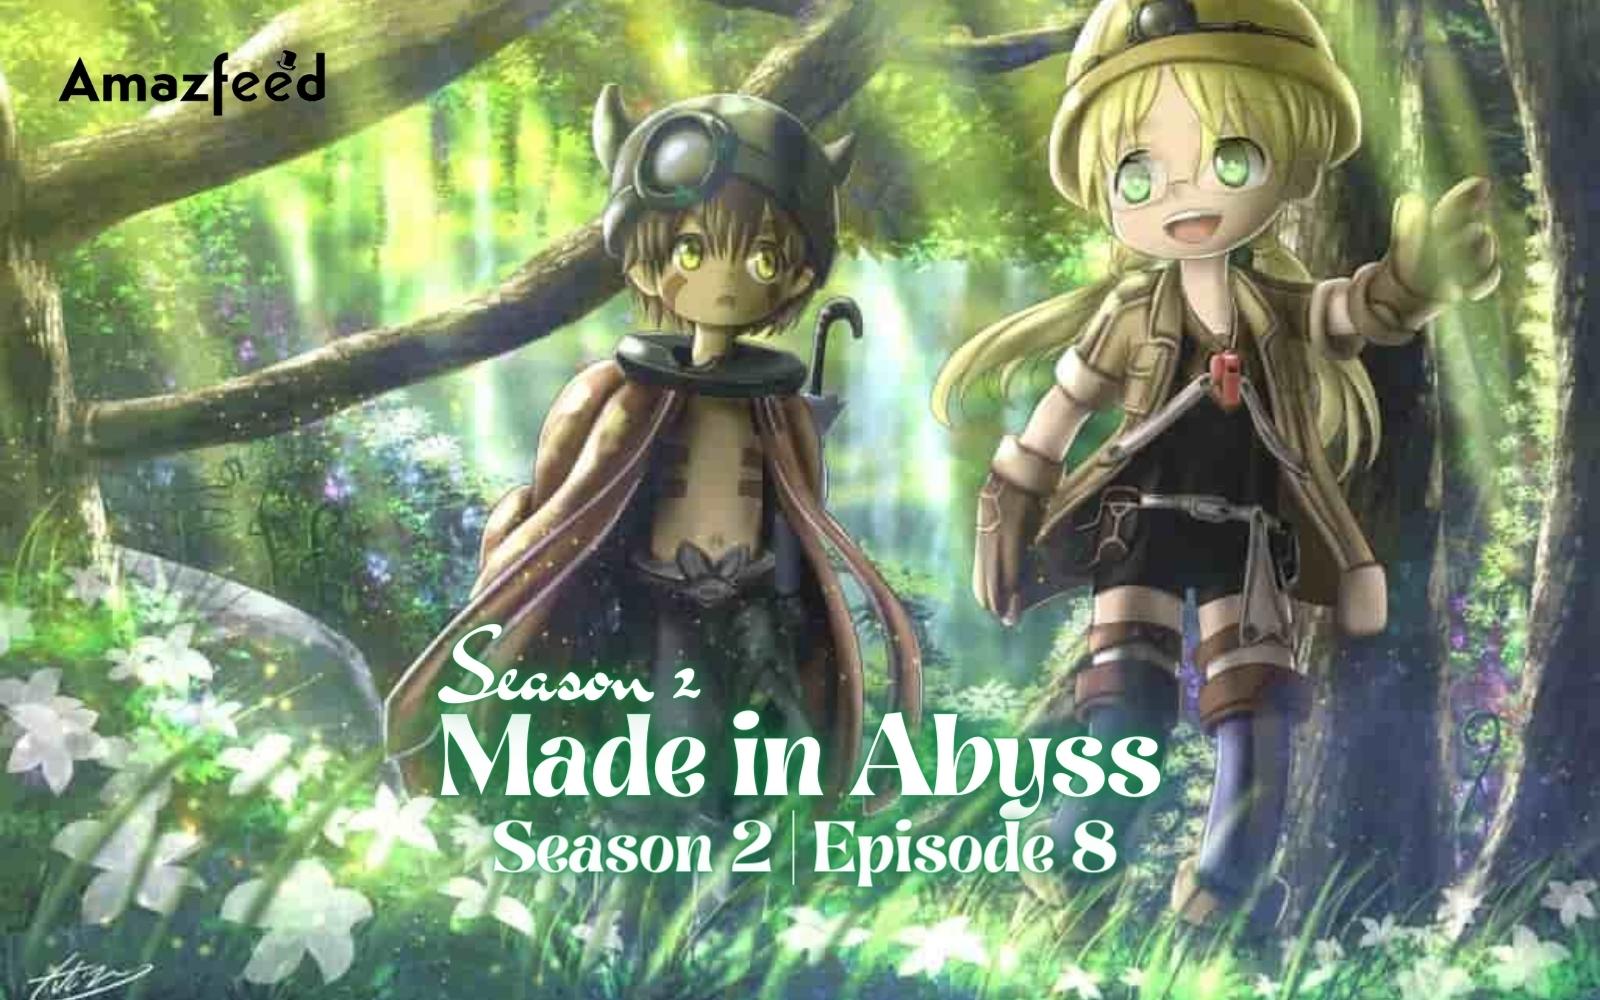 Made in Abyss Season 2 Episode 8 : Where to Watch, Countdown, Release Date, Recap, Cast & Spoiler